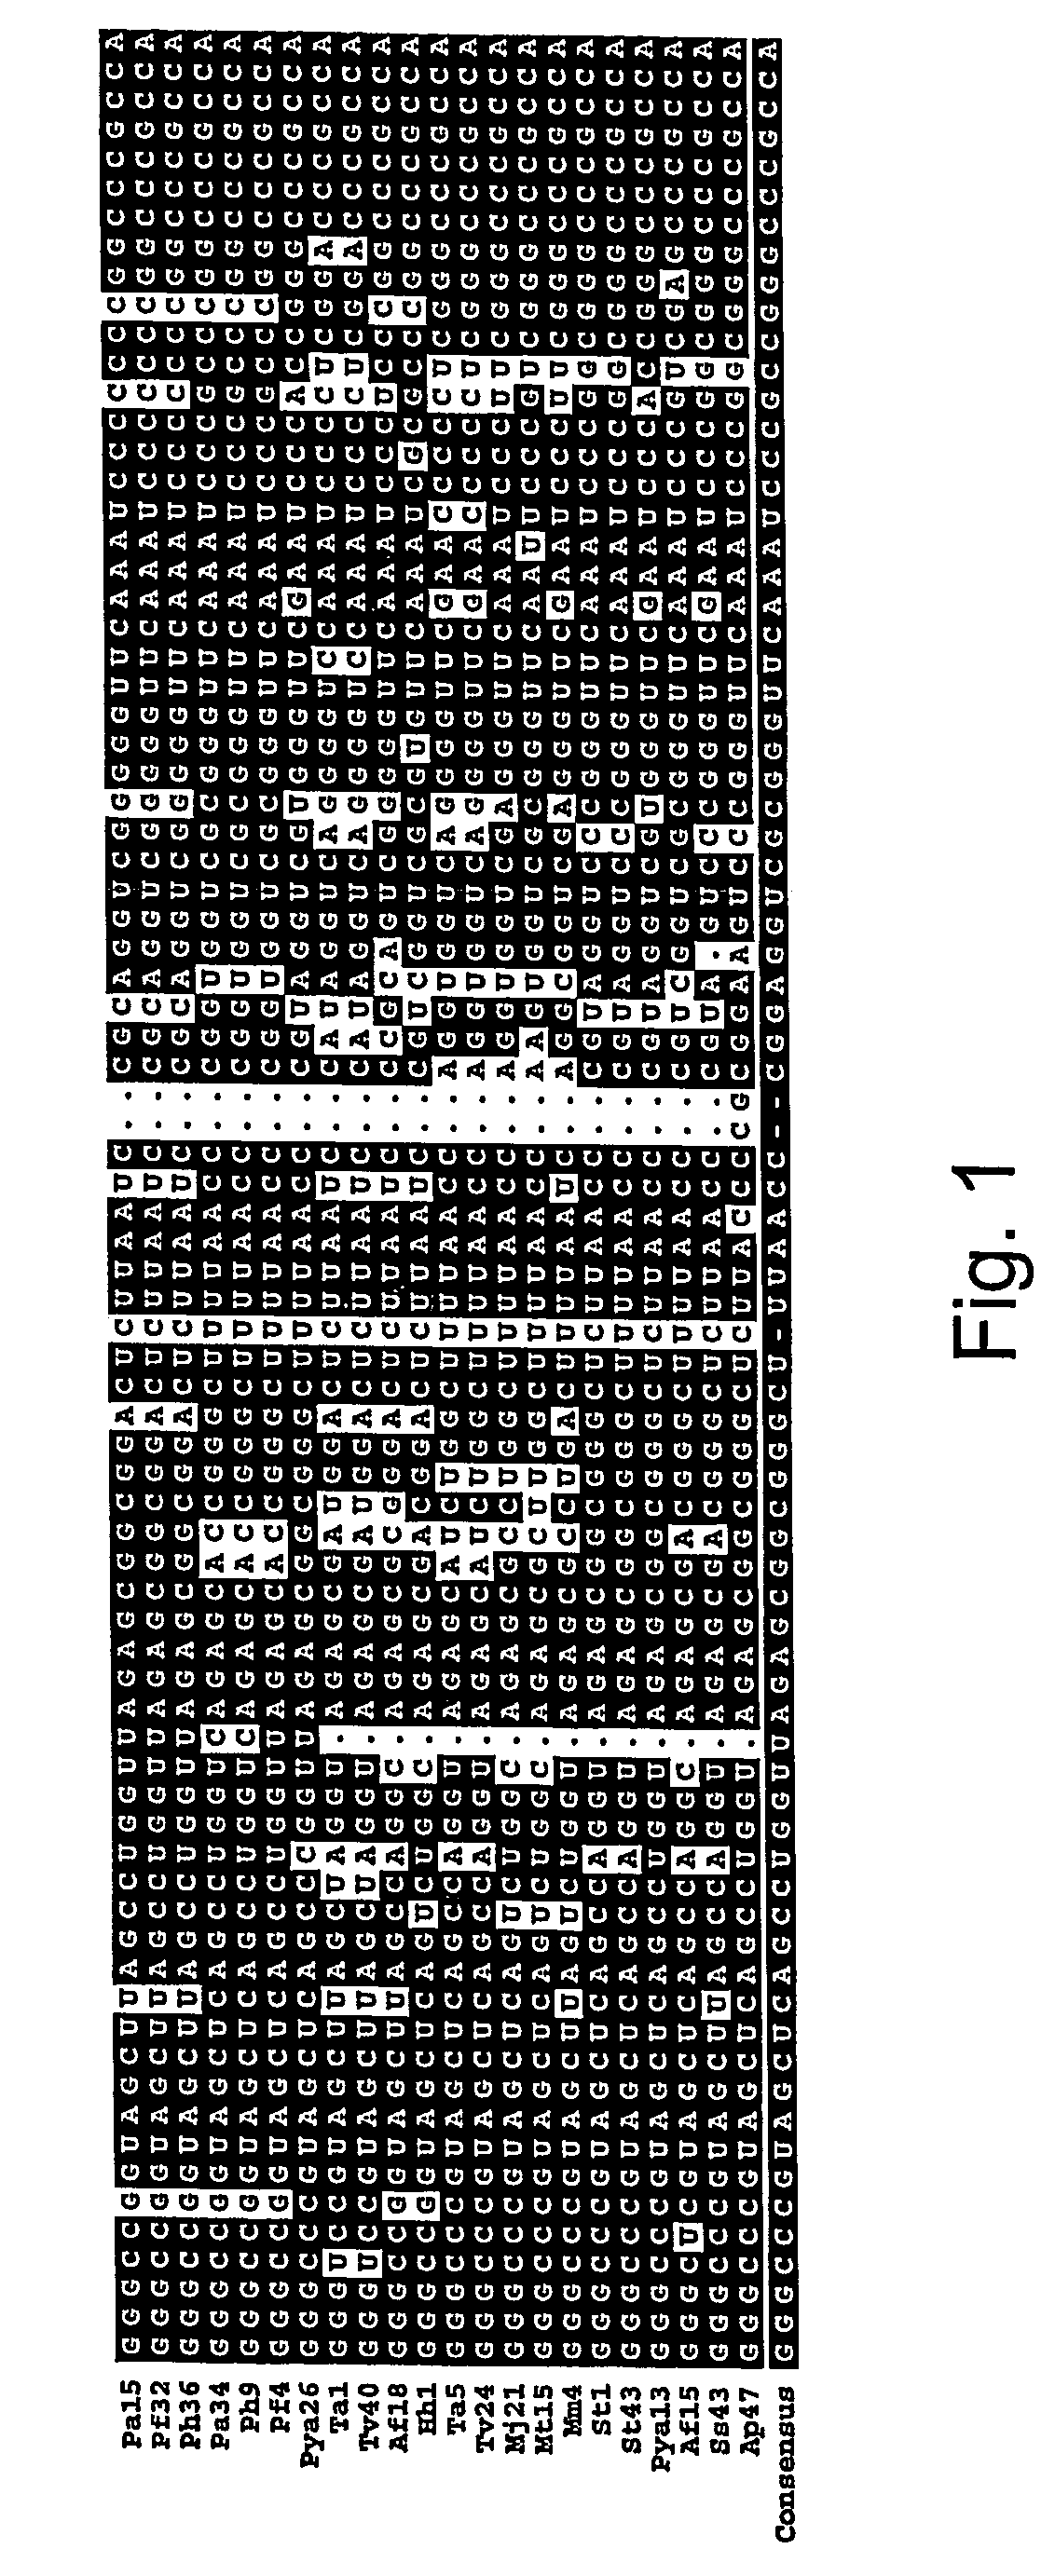 Compositions of orthogonal lysyl-trna and aminoacyl-trna synthetase pairs and uses thereof